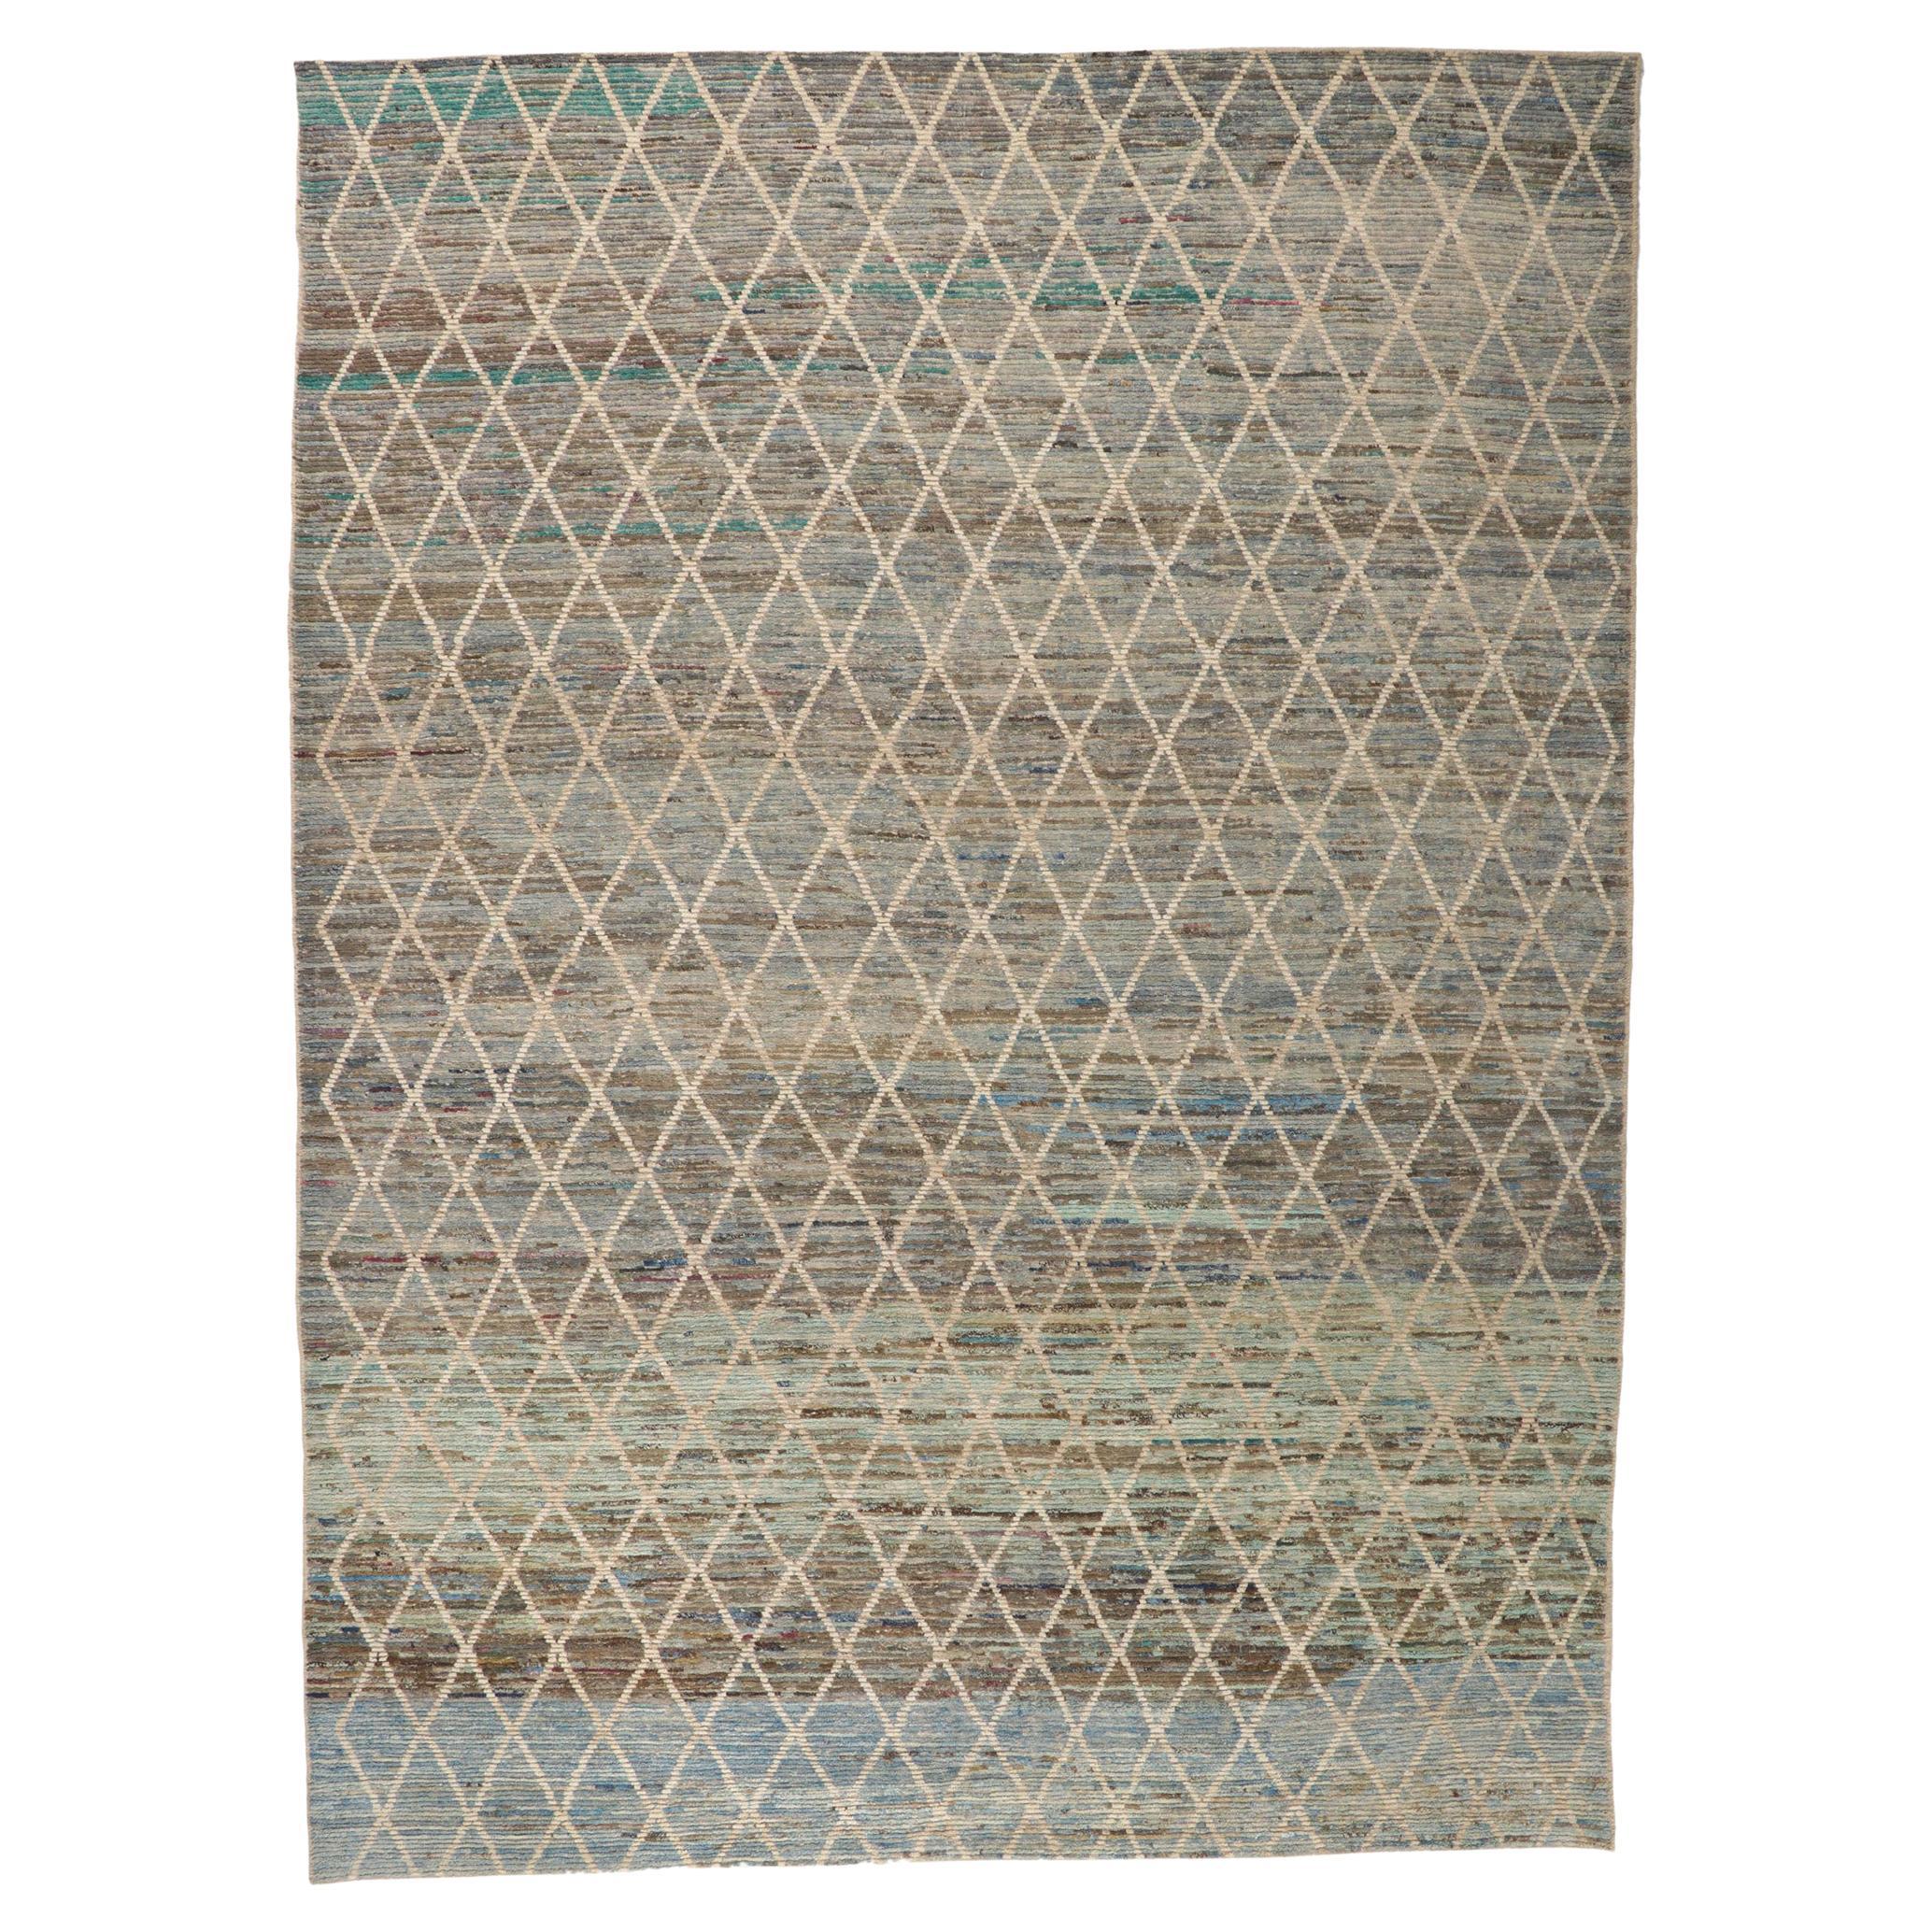 Large Modern Earth-Tone Moroccan Rug, Nature-Inspired Color Palette